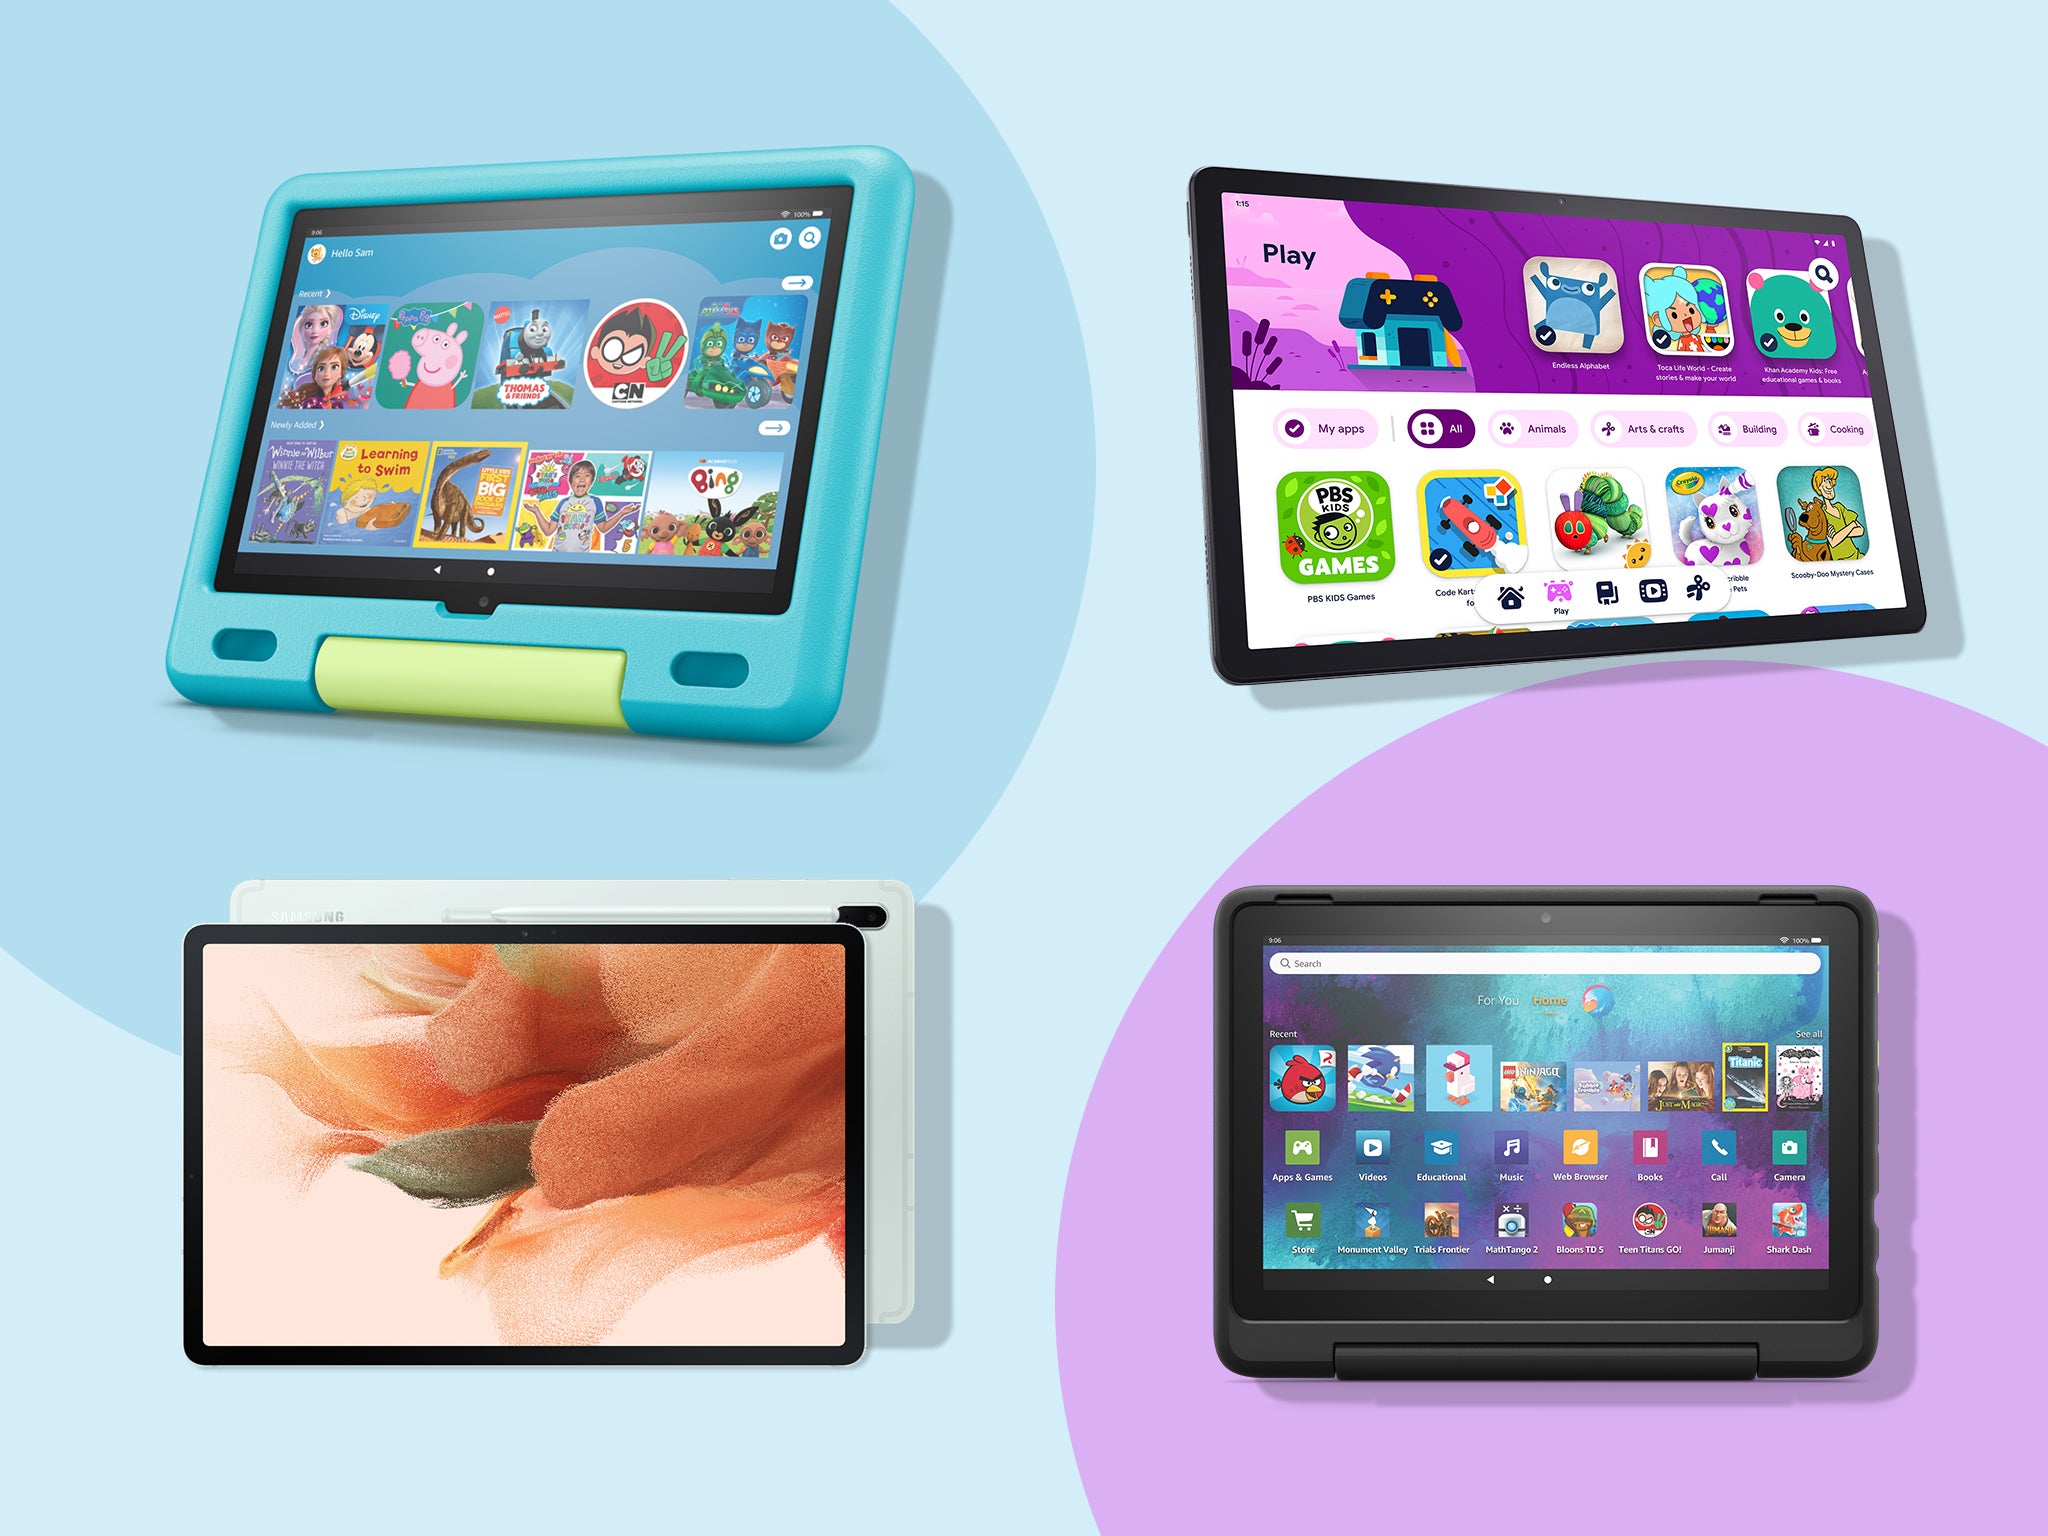 Mini Kids Laptop Tablet Ipad Computer Child Educational Game Gaming Toy Learning 